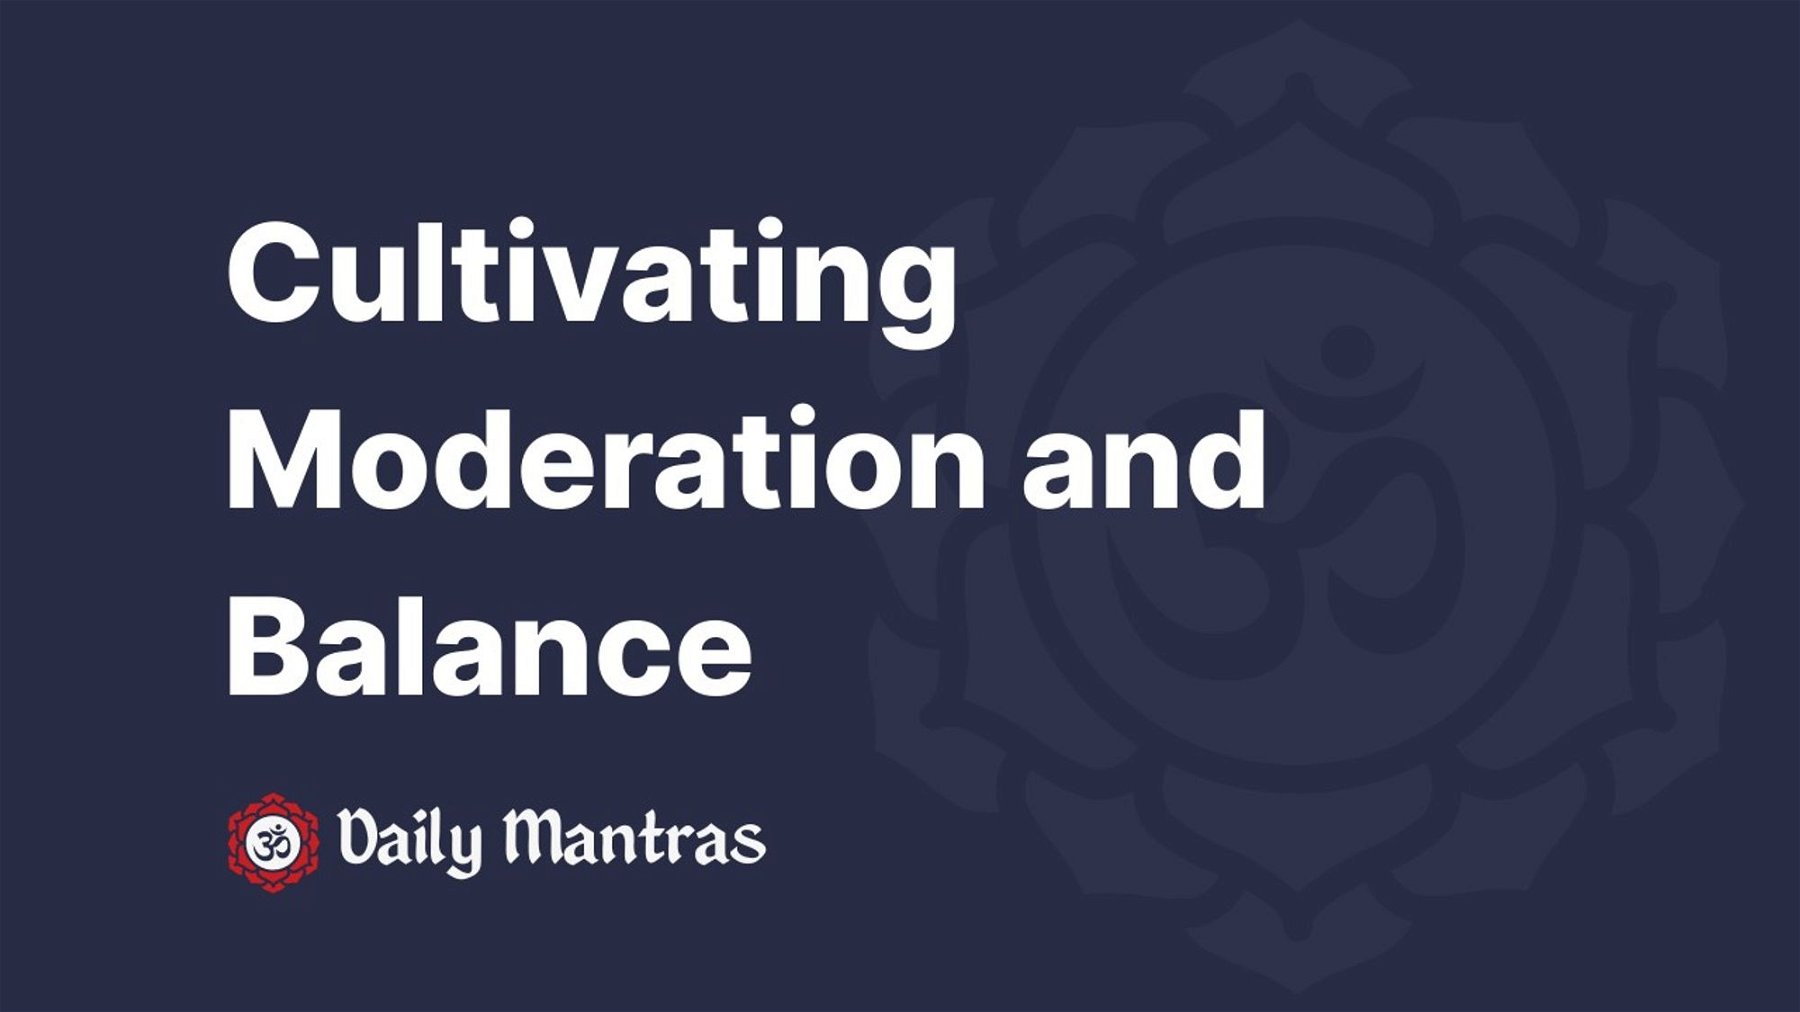 Cultivating Moderation and Balance